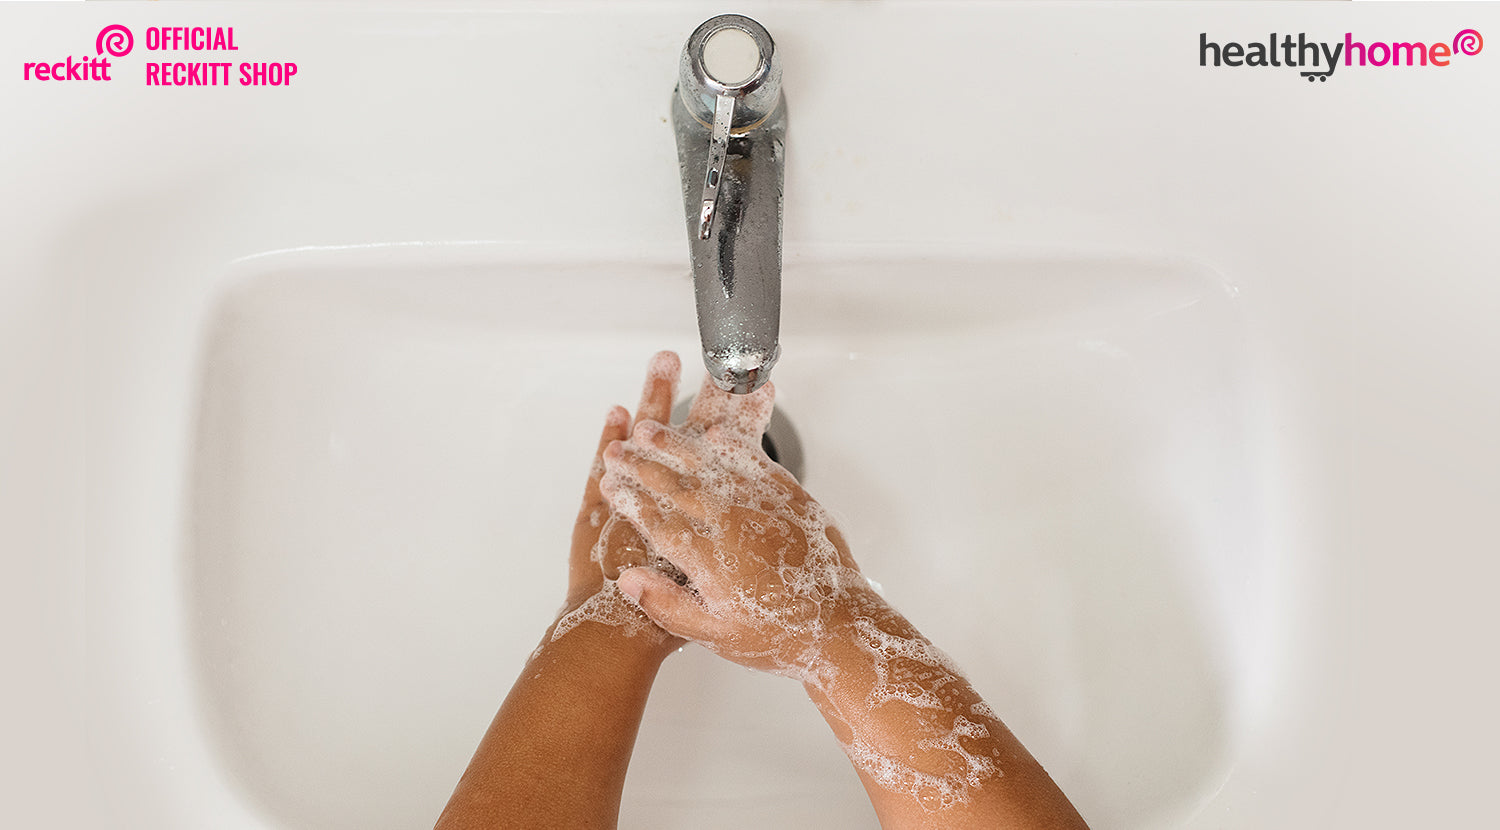 5 Ways to Teach Kids About Personal Hygiene